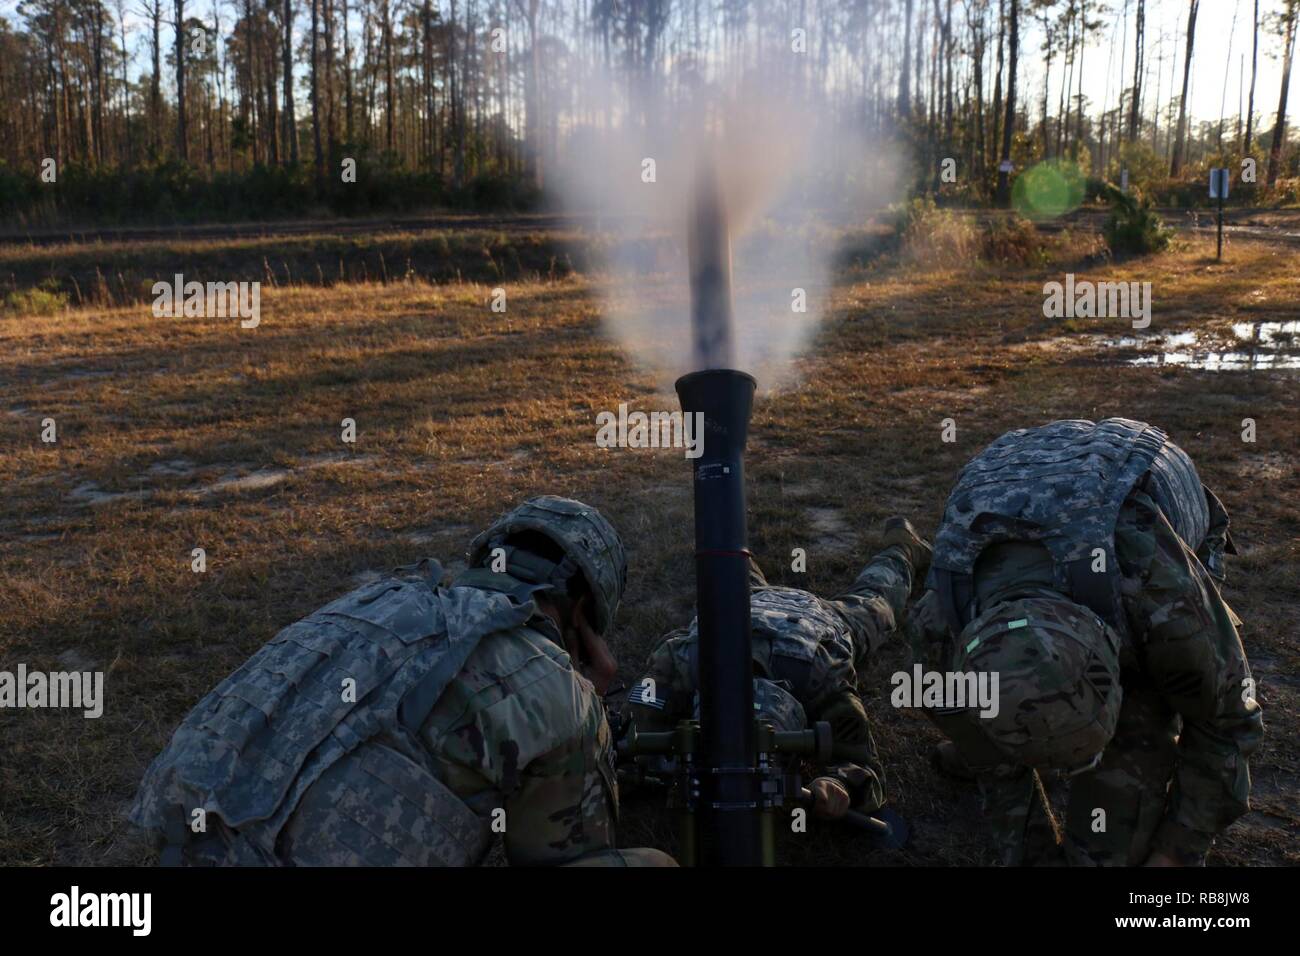 Indirect fire infantrymen with 3rd Battalion, 7th Infantry Regiment, 2nd Infantry Brigade Combat Team, 3rd Infantry Division, fire an 88mm mortar round during a combined arms live-fire exercise (CALFX) at Fort Stewart, Ga., December 15, 2016. The CALFX brought together infantrymen, engineers, artillerymen and air support assets to certify the Bravo 13 range complex. Bravo 13 is a newly configured light infantry range designed for company live fire exercises at Fort Stewart. Stock Photo